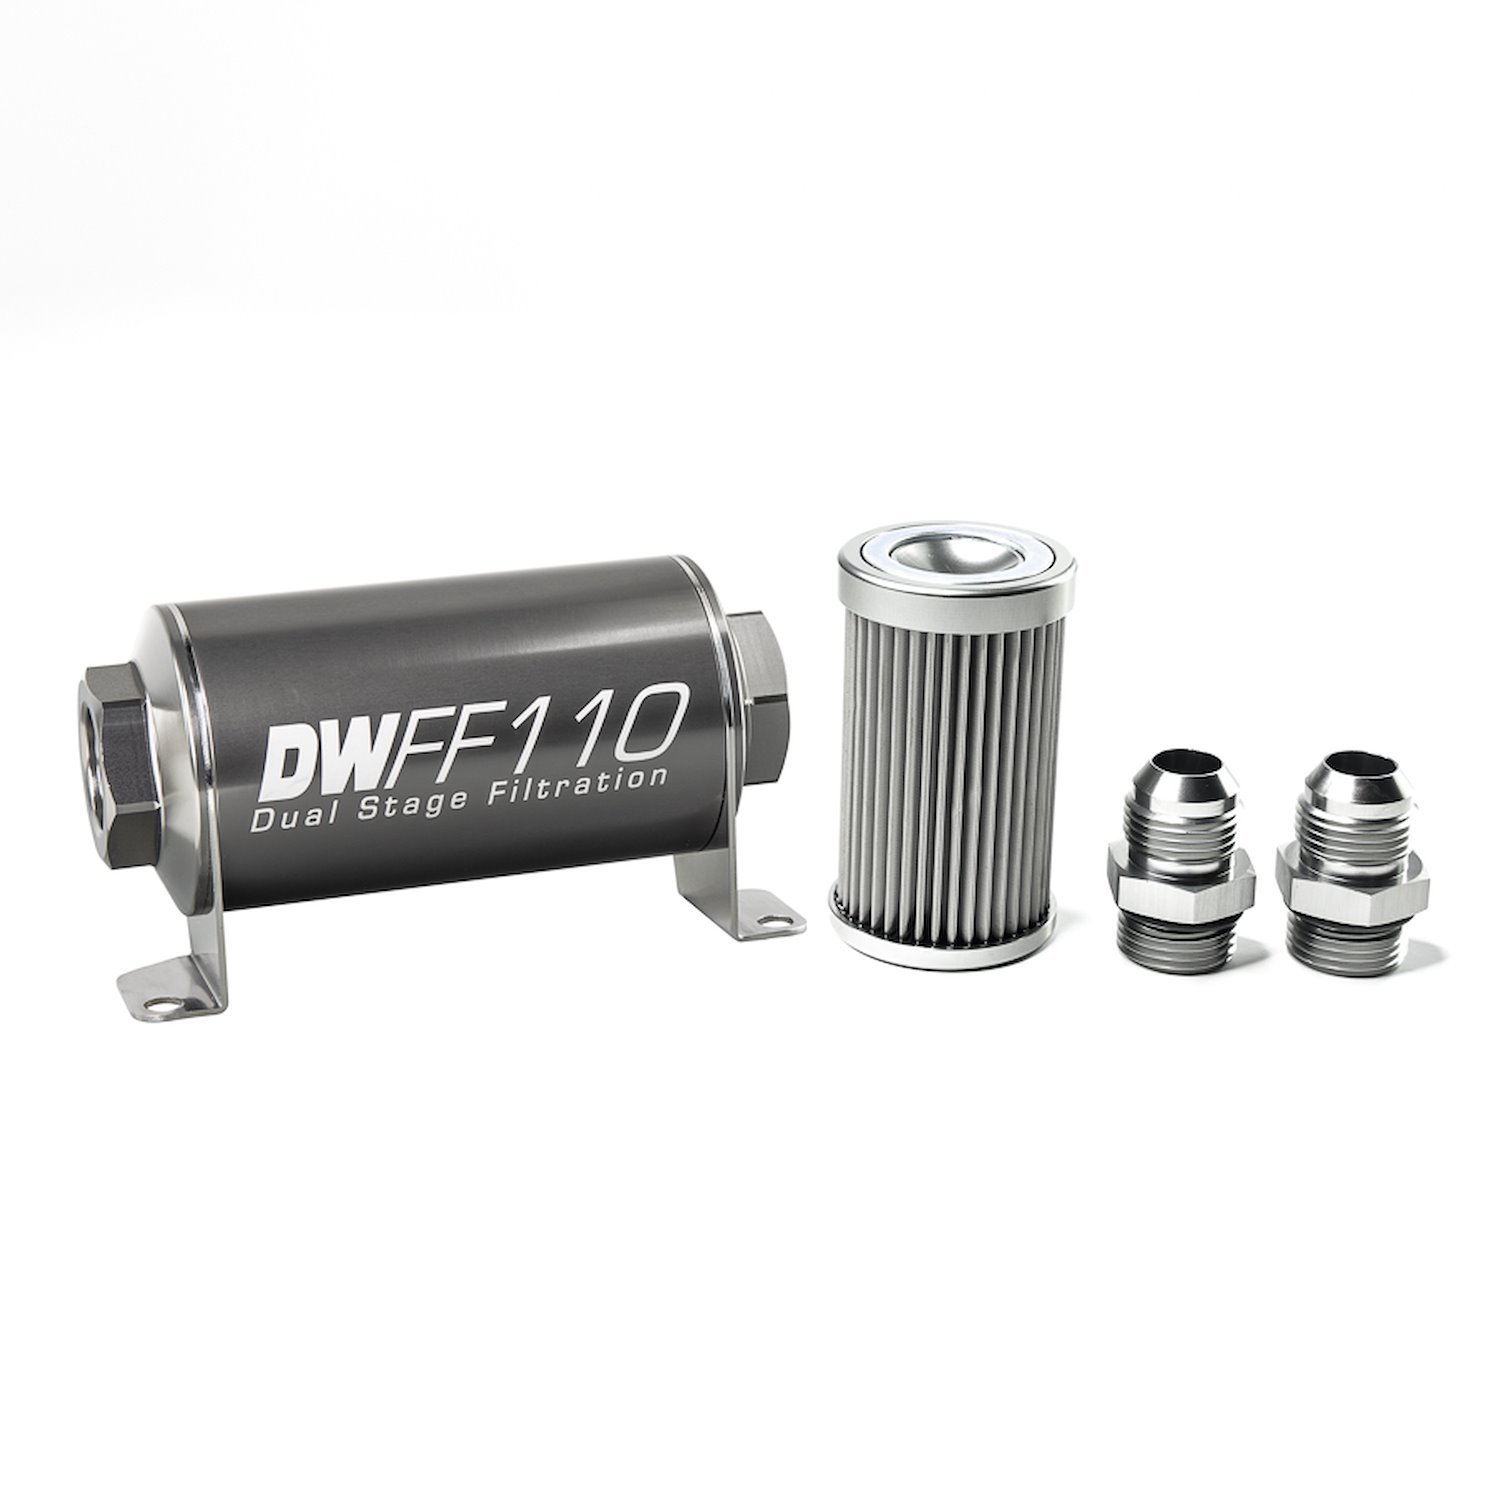 803110010K10 In-line fuel filter element and housing kit stainless steel 10 micron -10AN 110mm. Universal